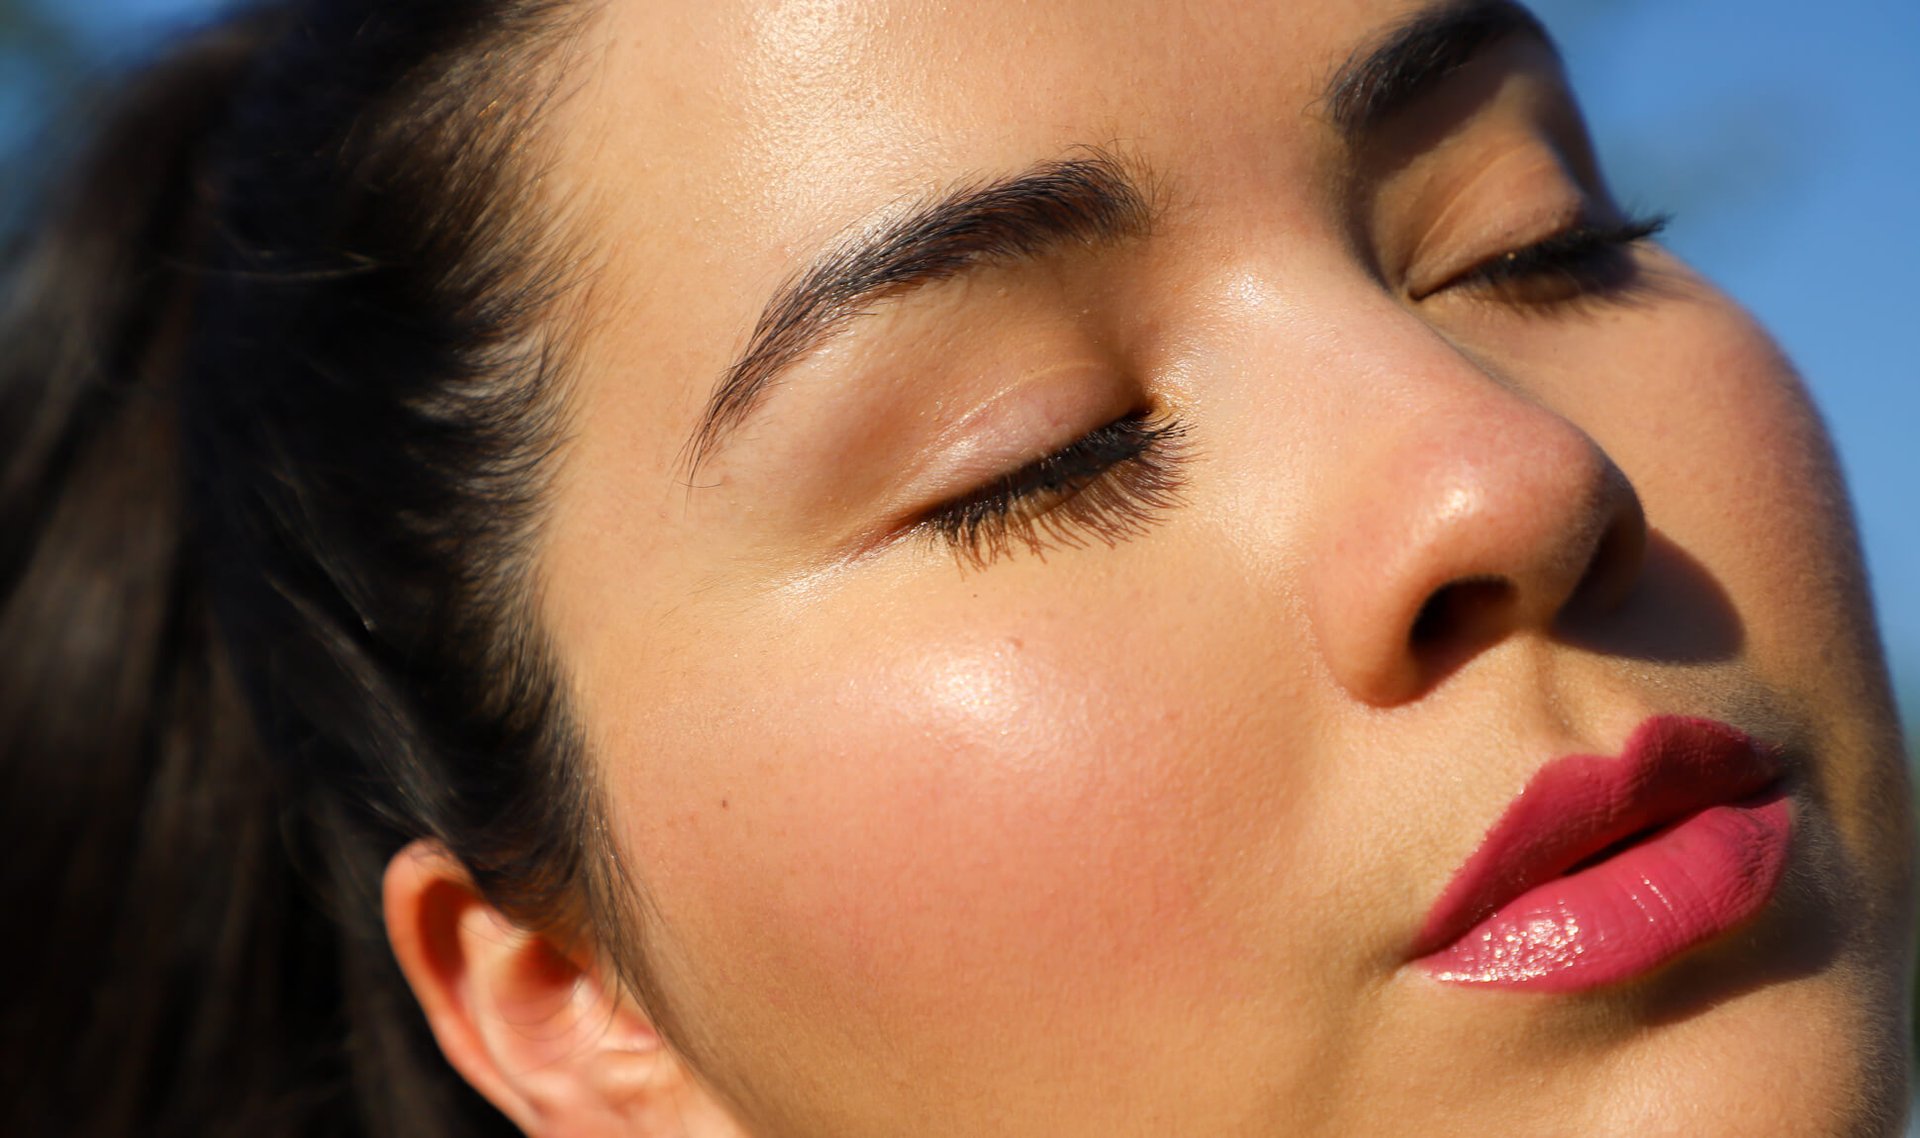 Can Letting Your Skin “Breathe” Improve Your Skin's Appearance?